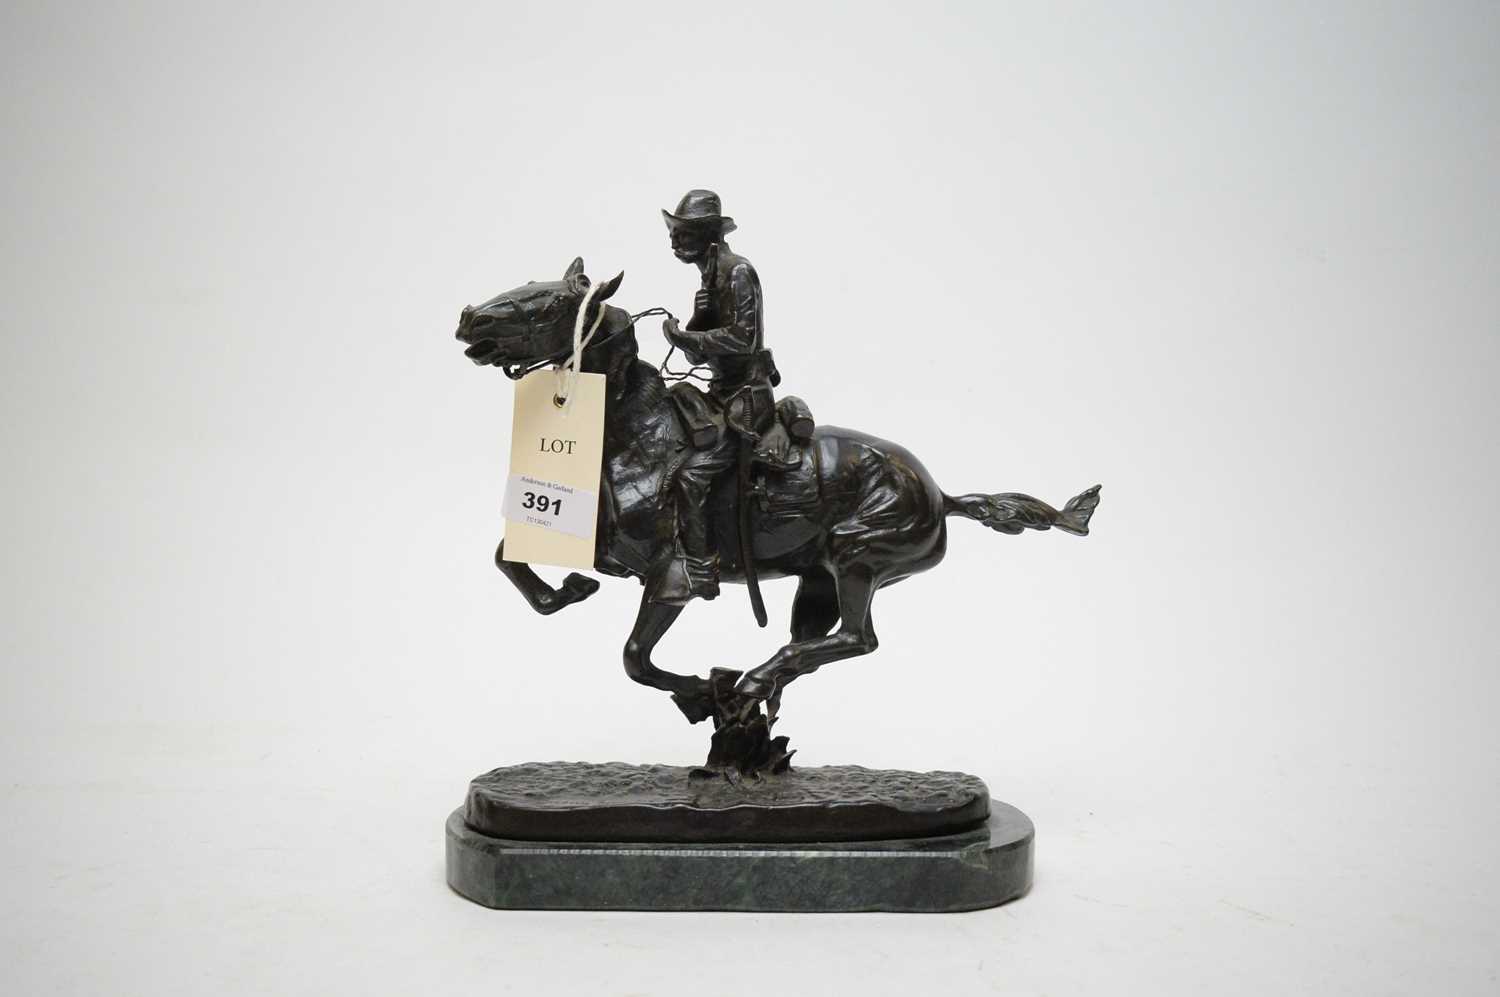 Lot 391 - After Frederick Remington - Cavalryman on galloping horse.